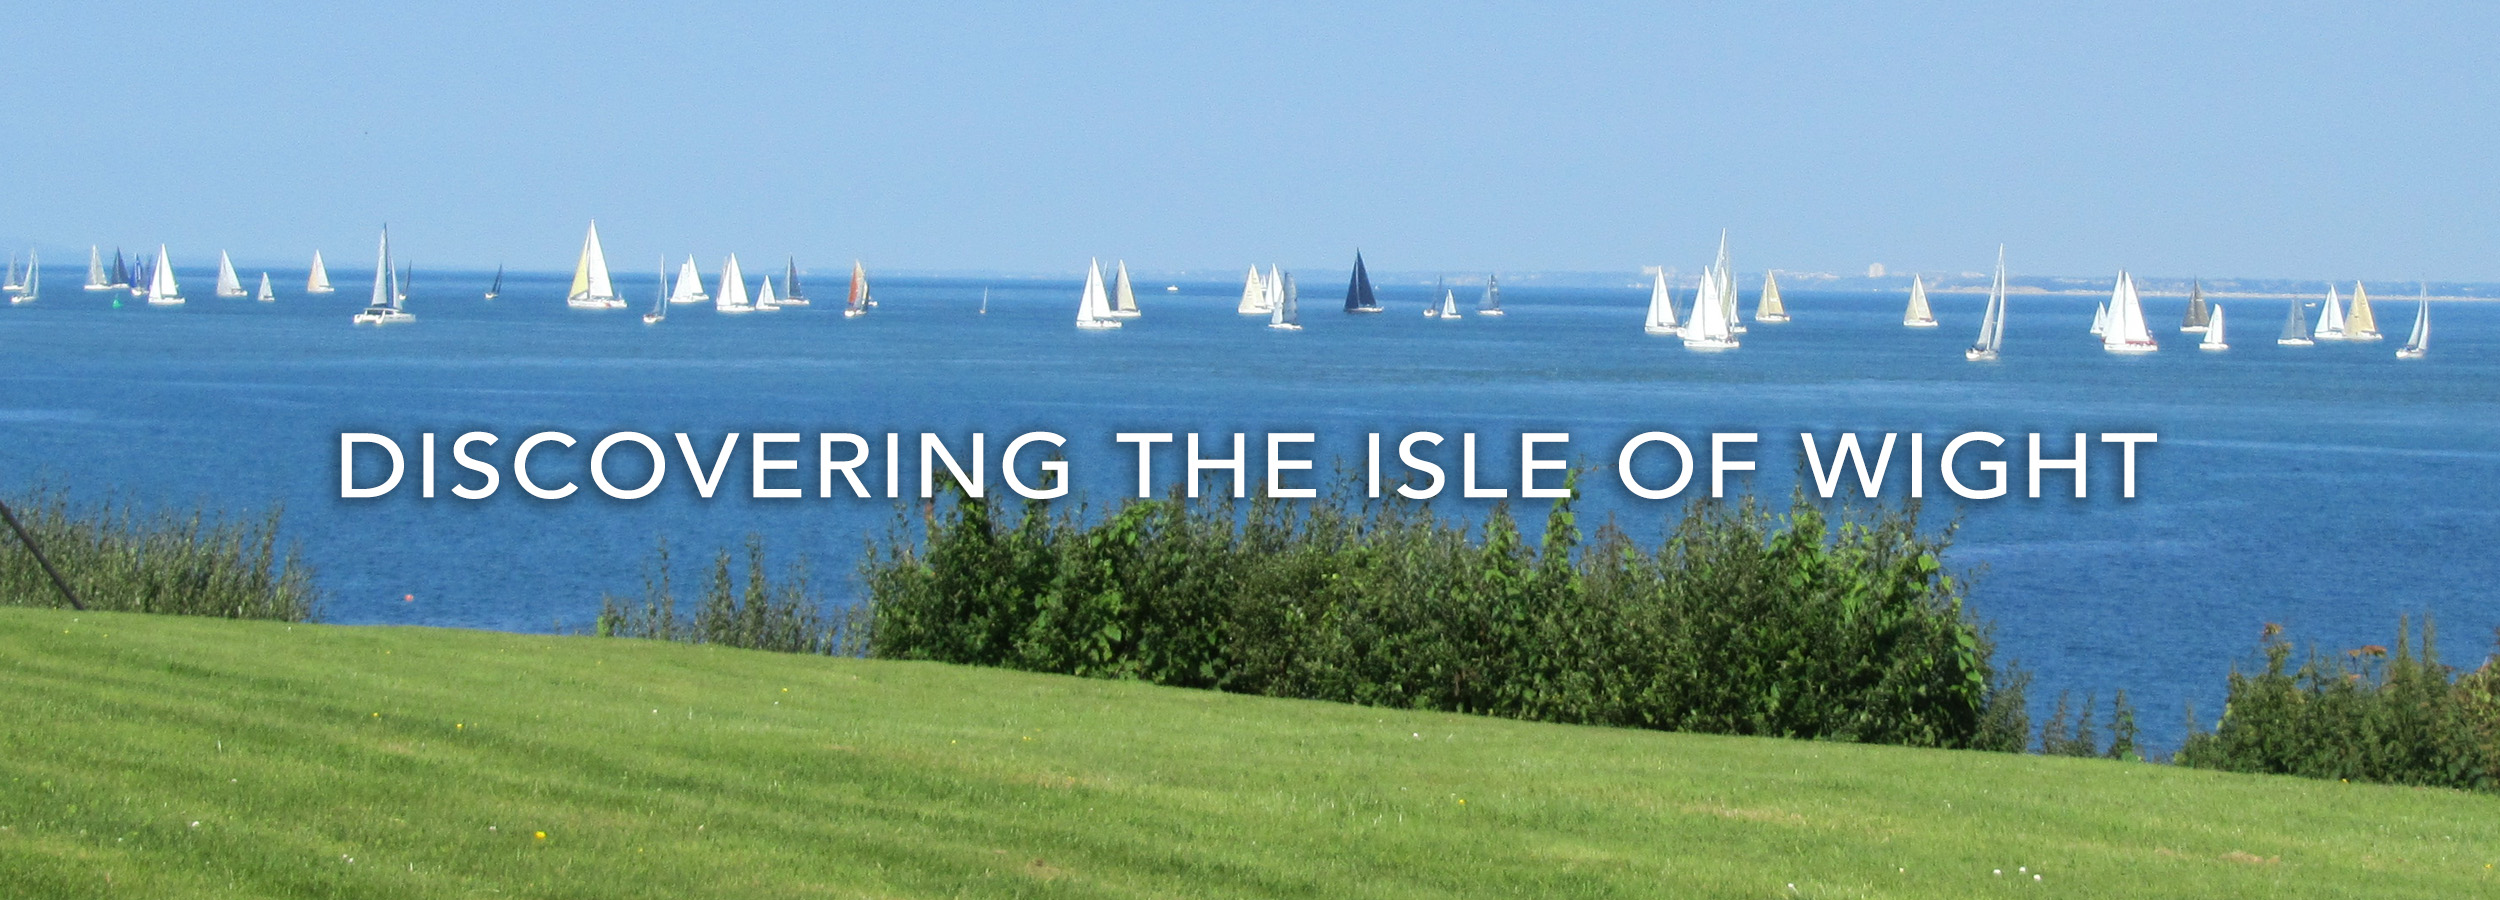 Discovering the Isle of Wight